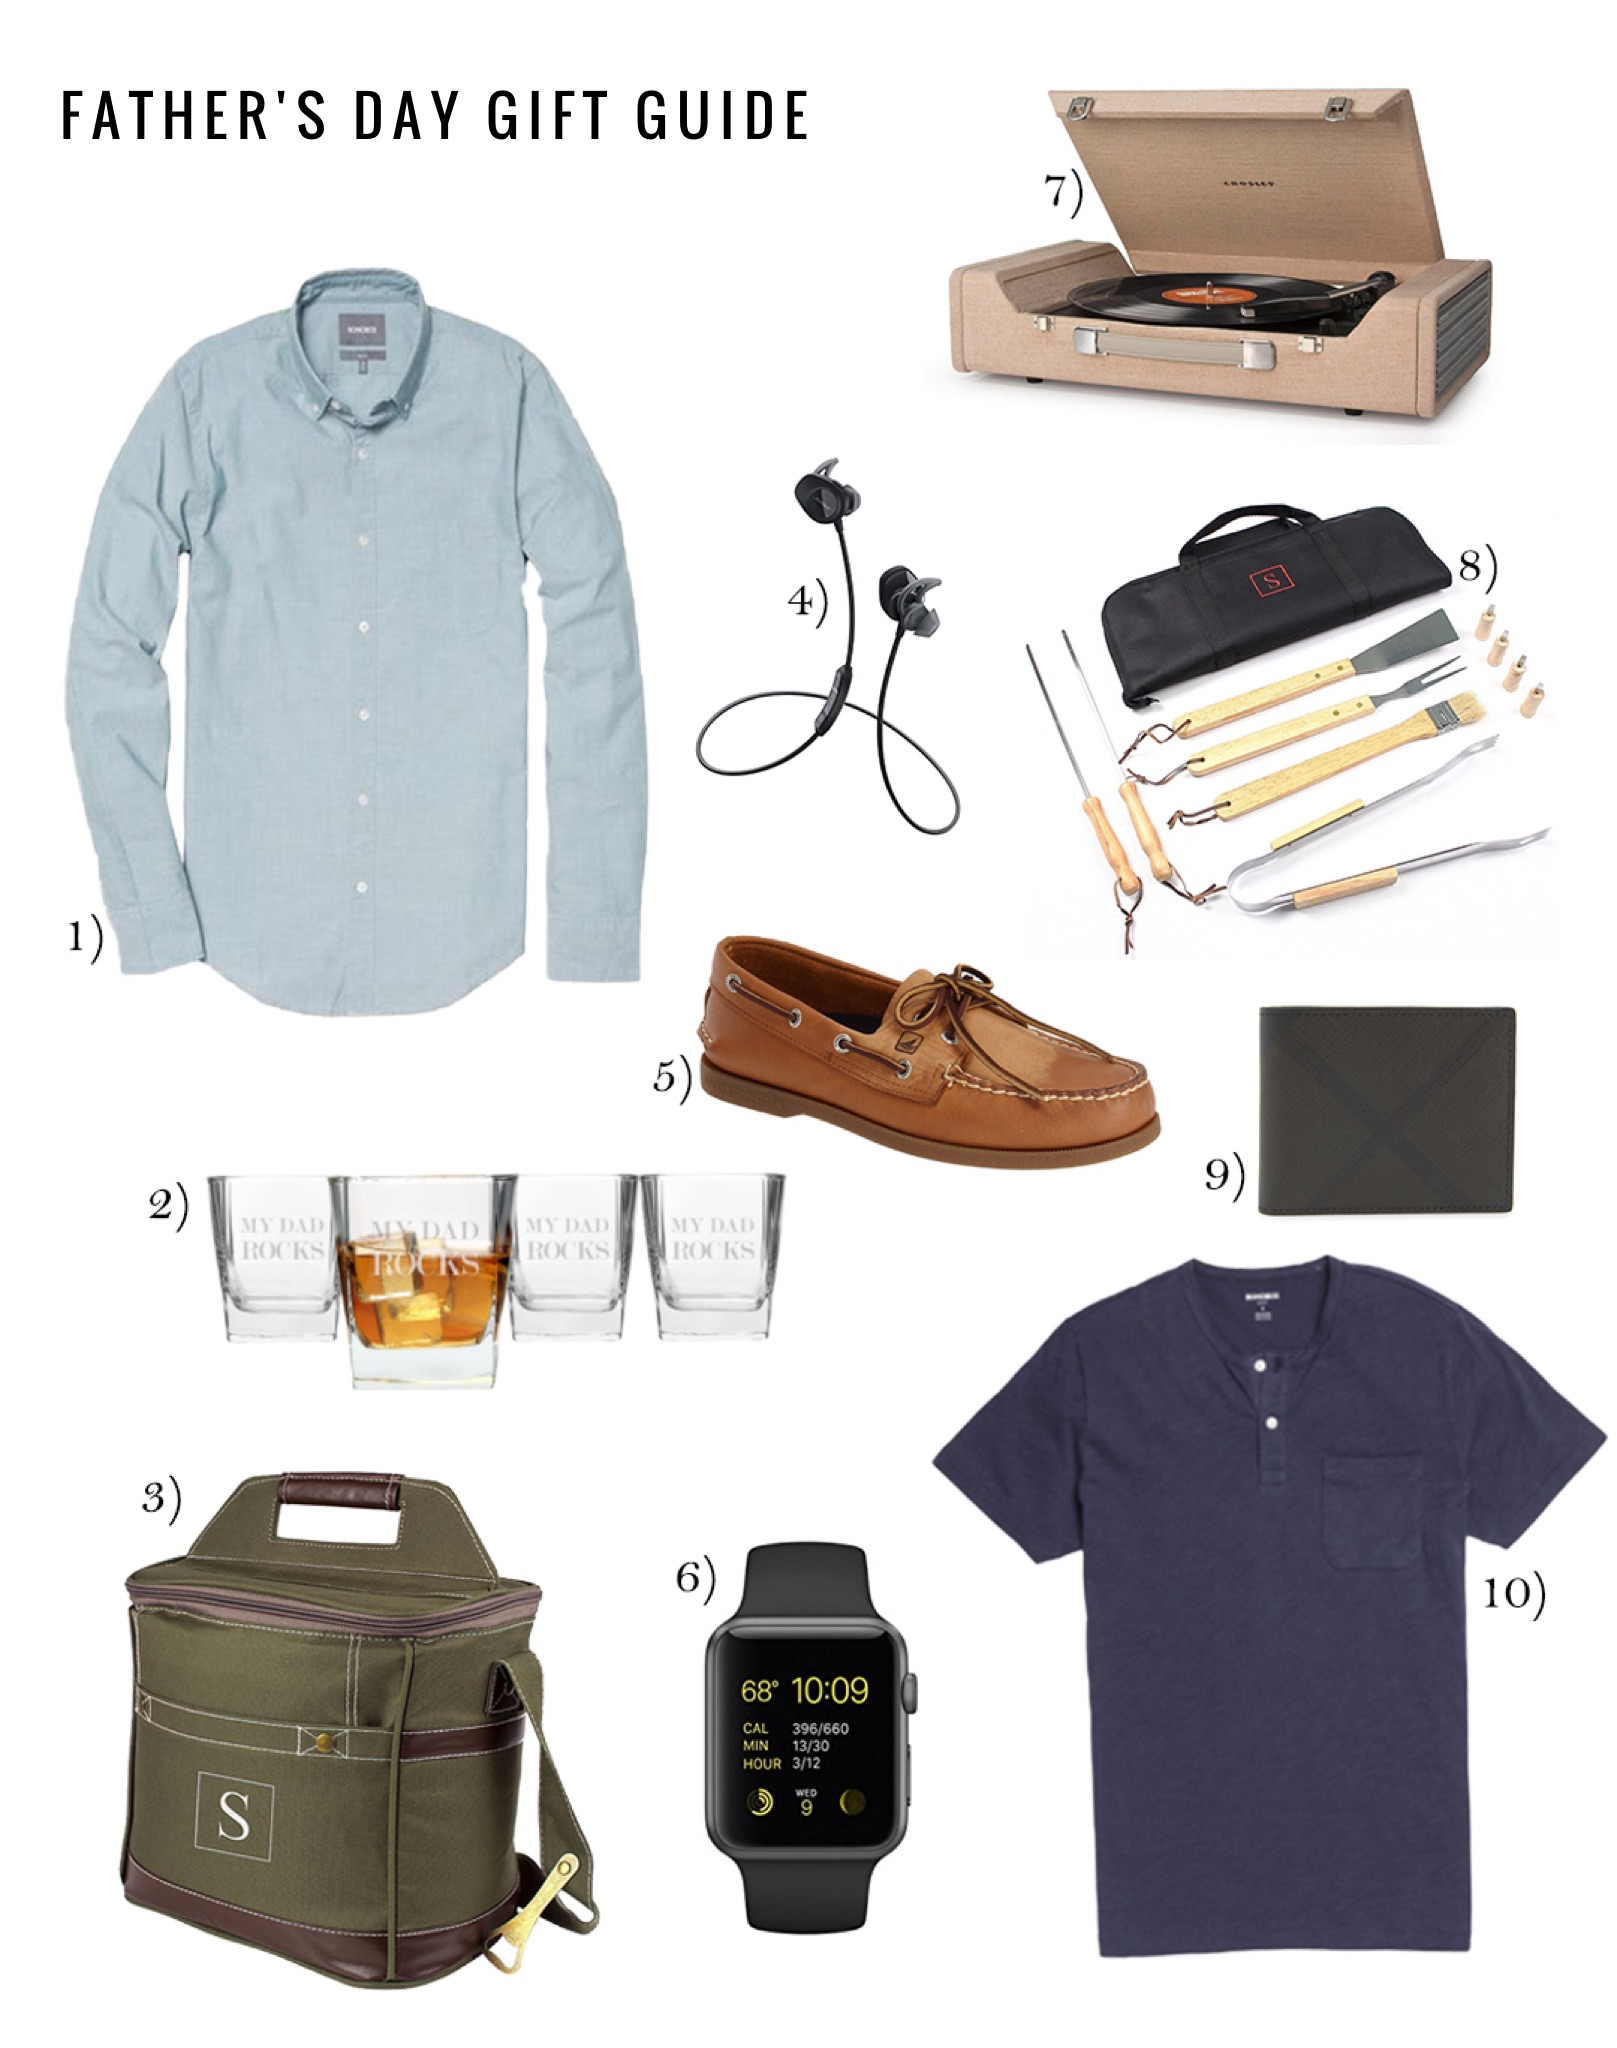 Father's Day Gift Guide - LifetoLauren